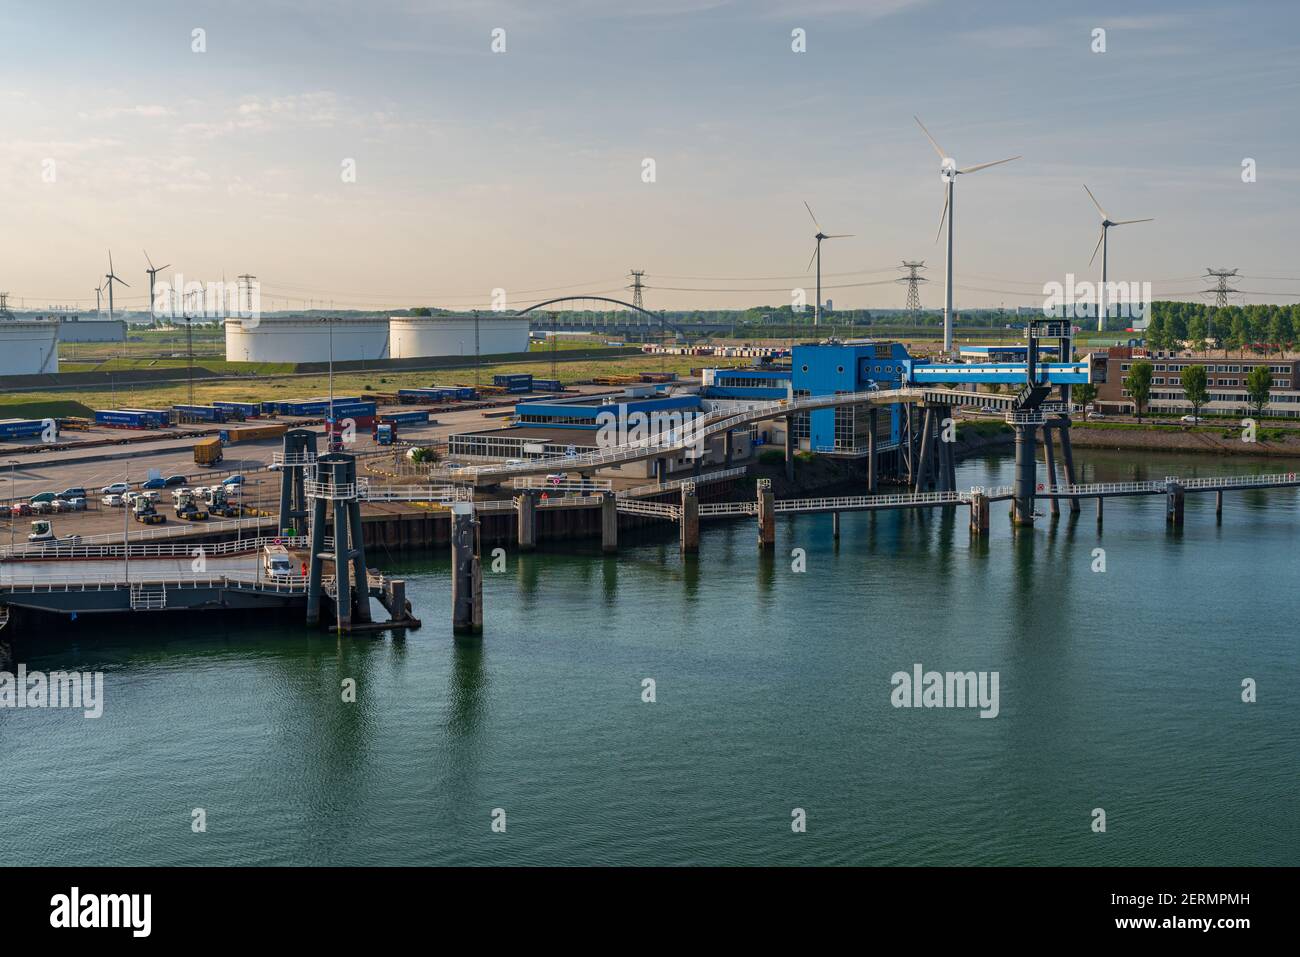 Rotterdam, South Holland, Netherlands - May 23, 2019: The ferry terminal in the Beneluxhaven of Europoort Stock Photo